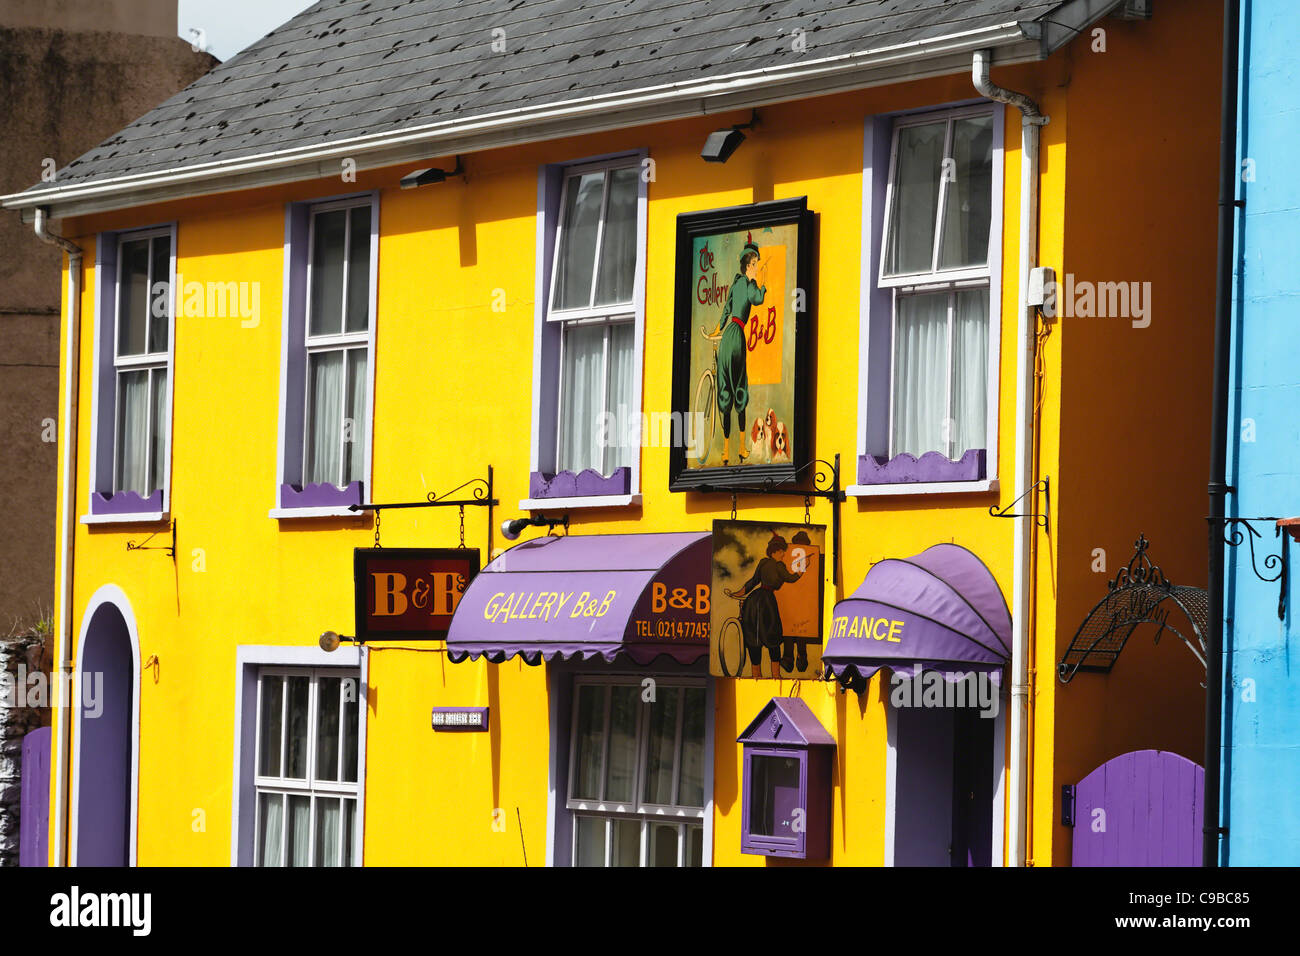 Brightly Painted Exterior of a Bed and Breakfast Building, Kinsale, County Cork, Republic of Ireland Stock Photo